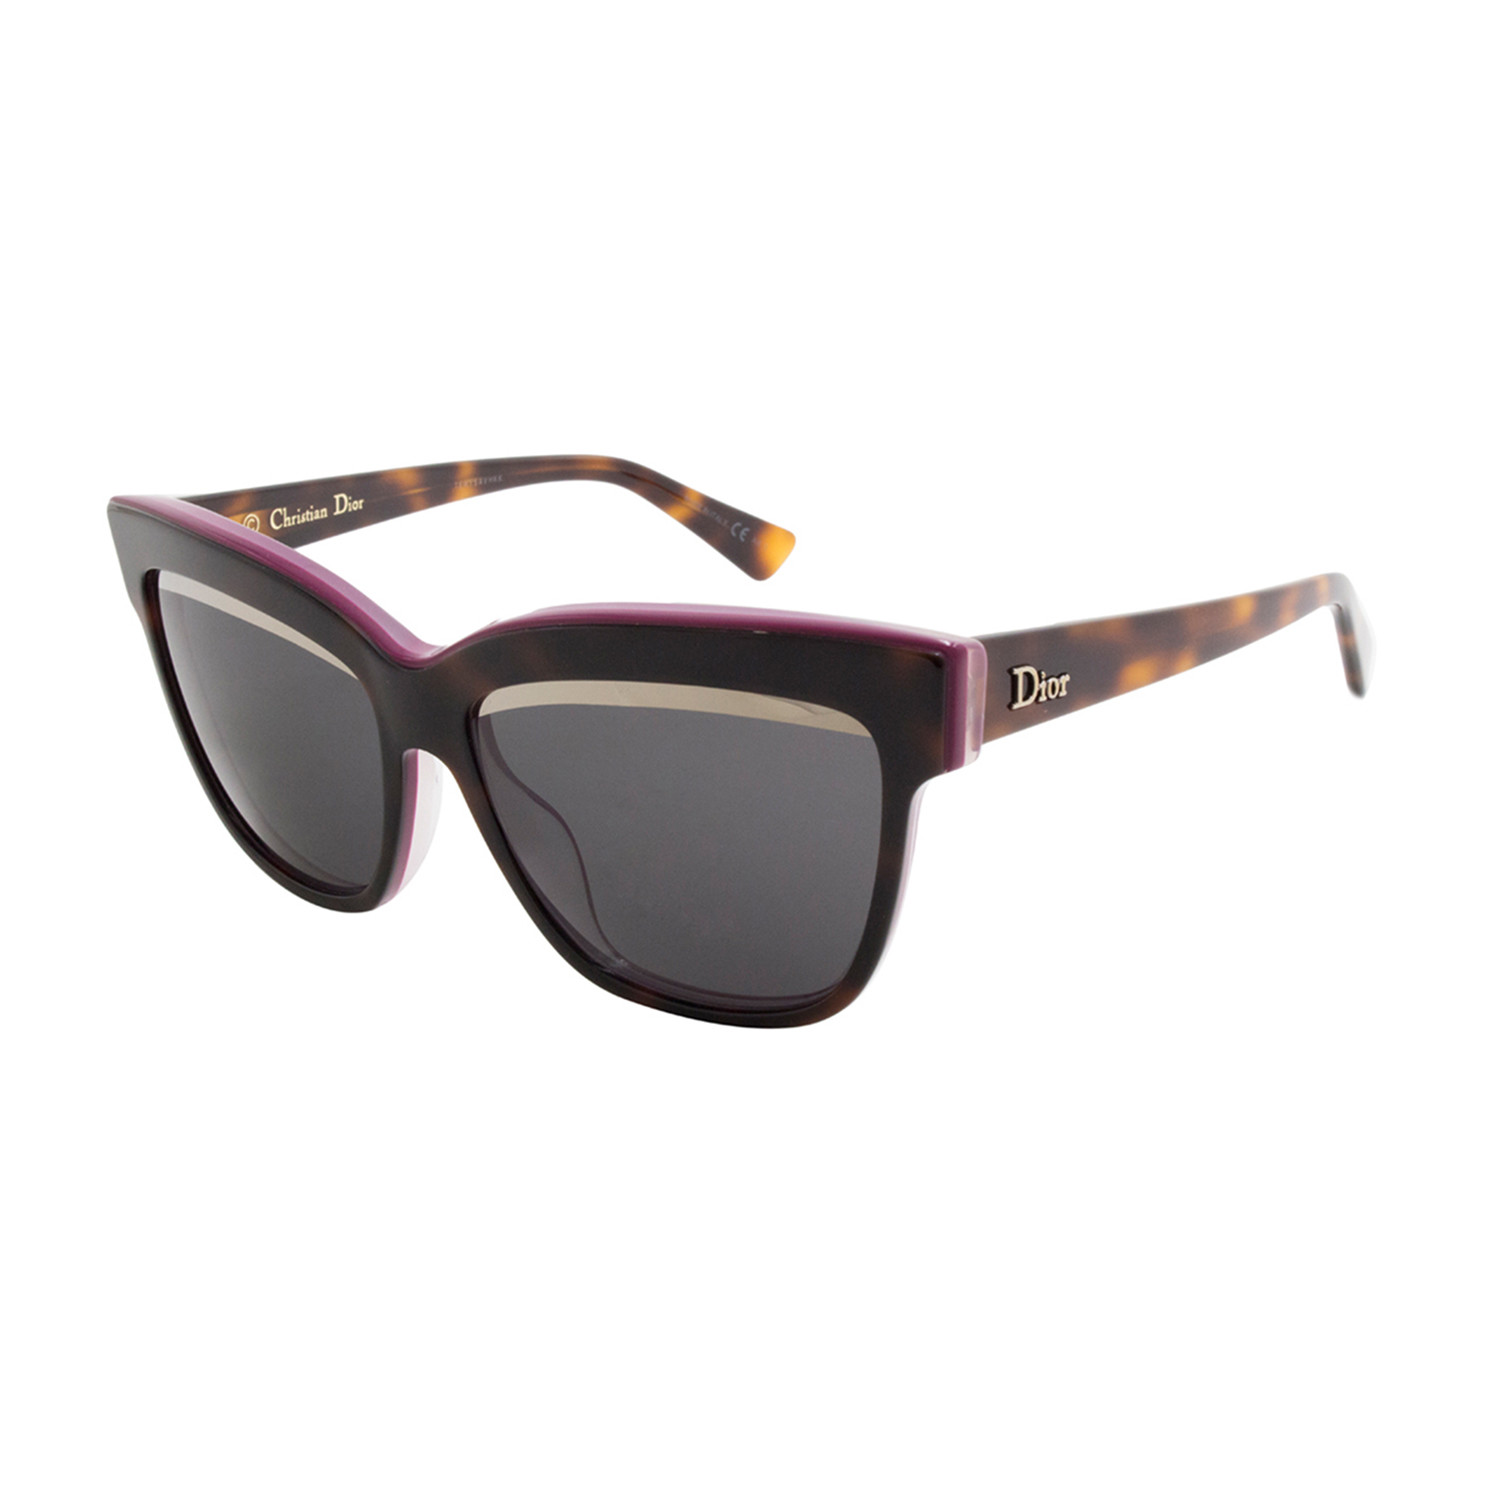 Dior Women S Graphic Sunglasses Havana Pink Christian Dior Touch Of Modern